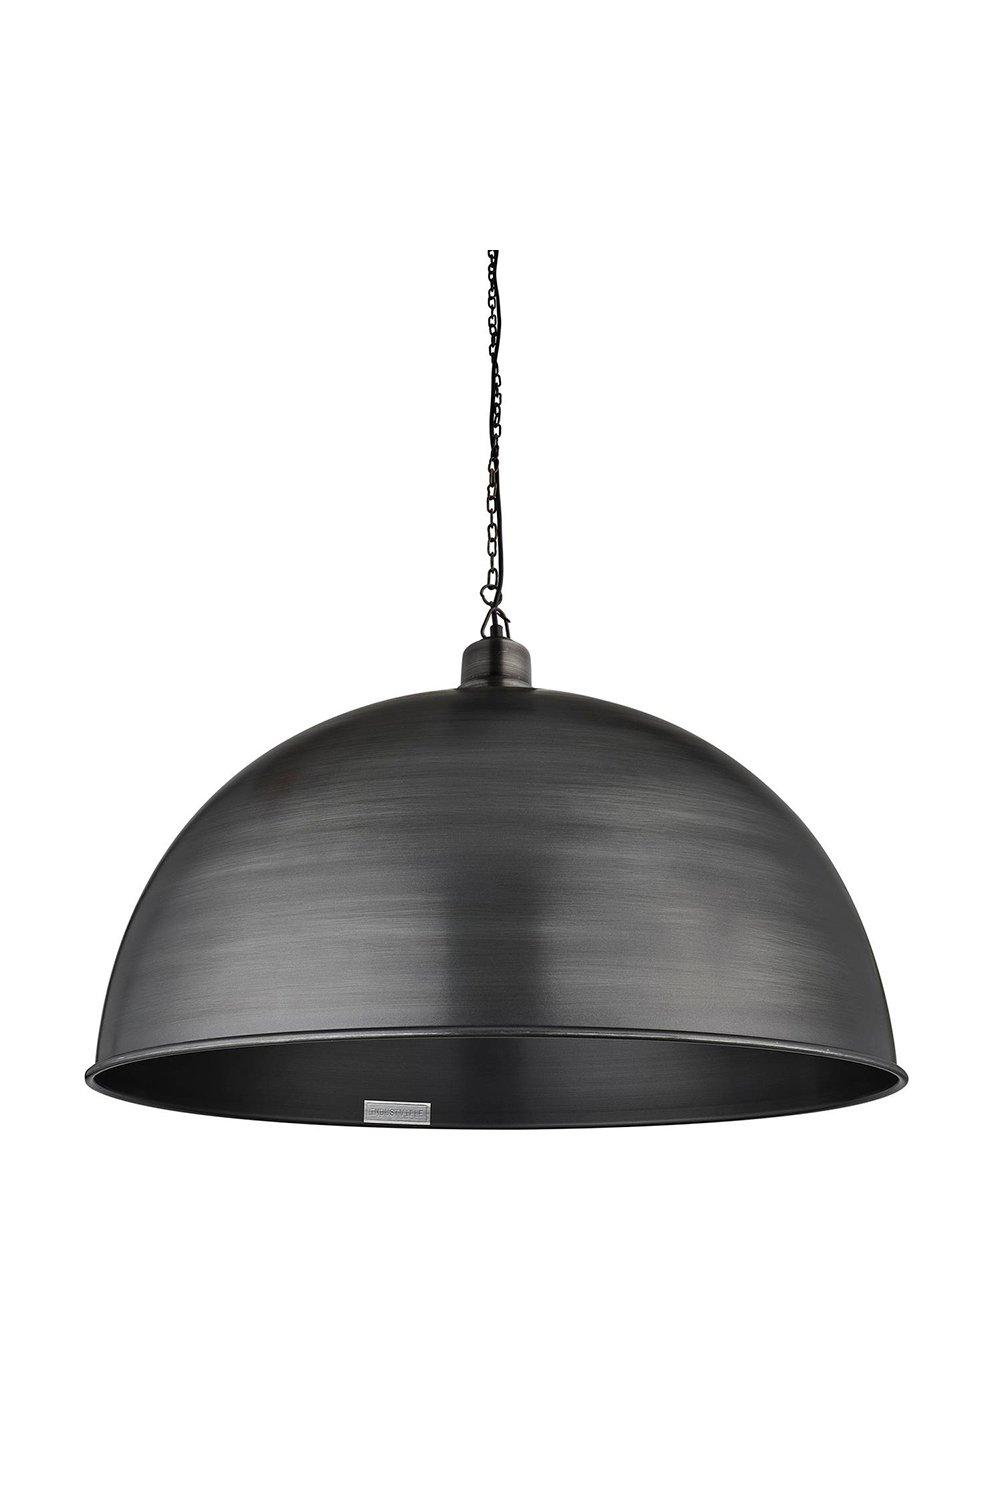 Brooklyn Giant Dome Pendant, 24 Inch, Pewter, Pewter Chain Holder